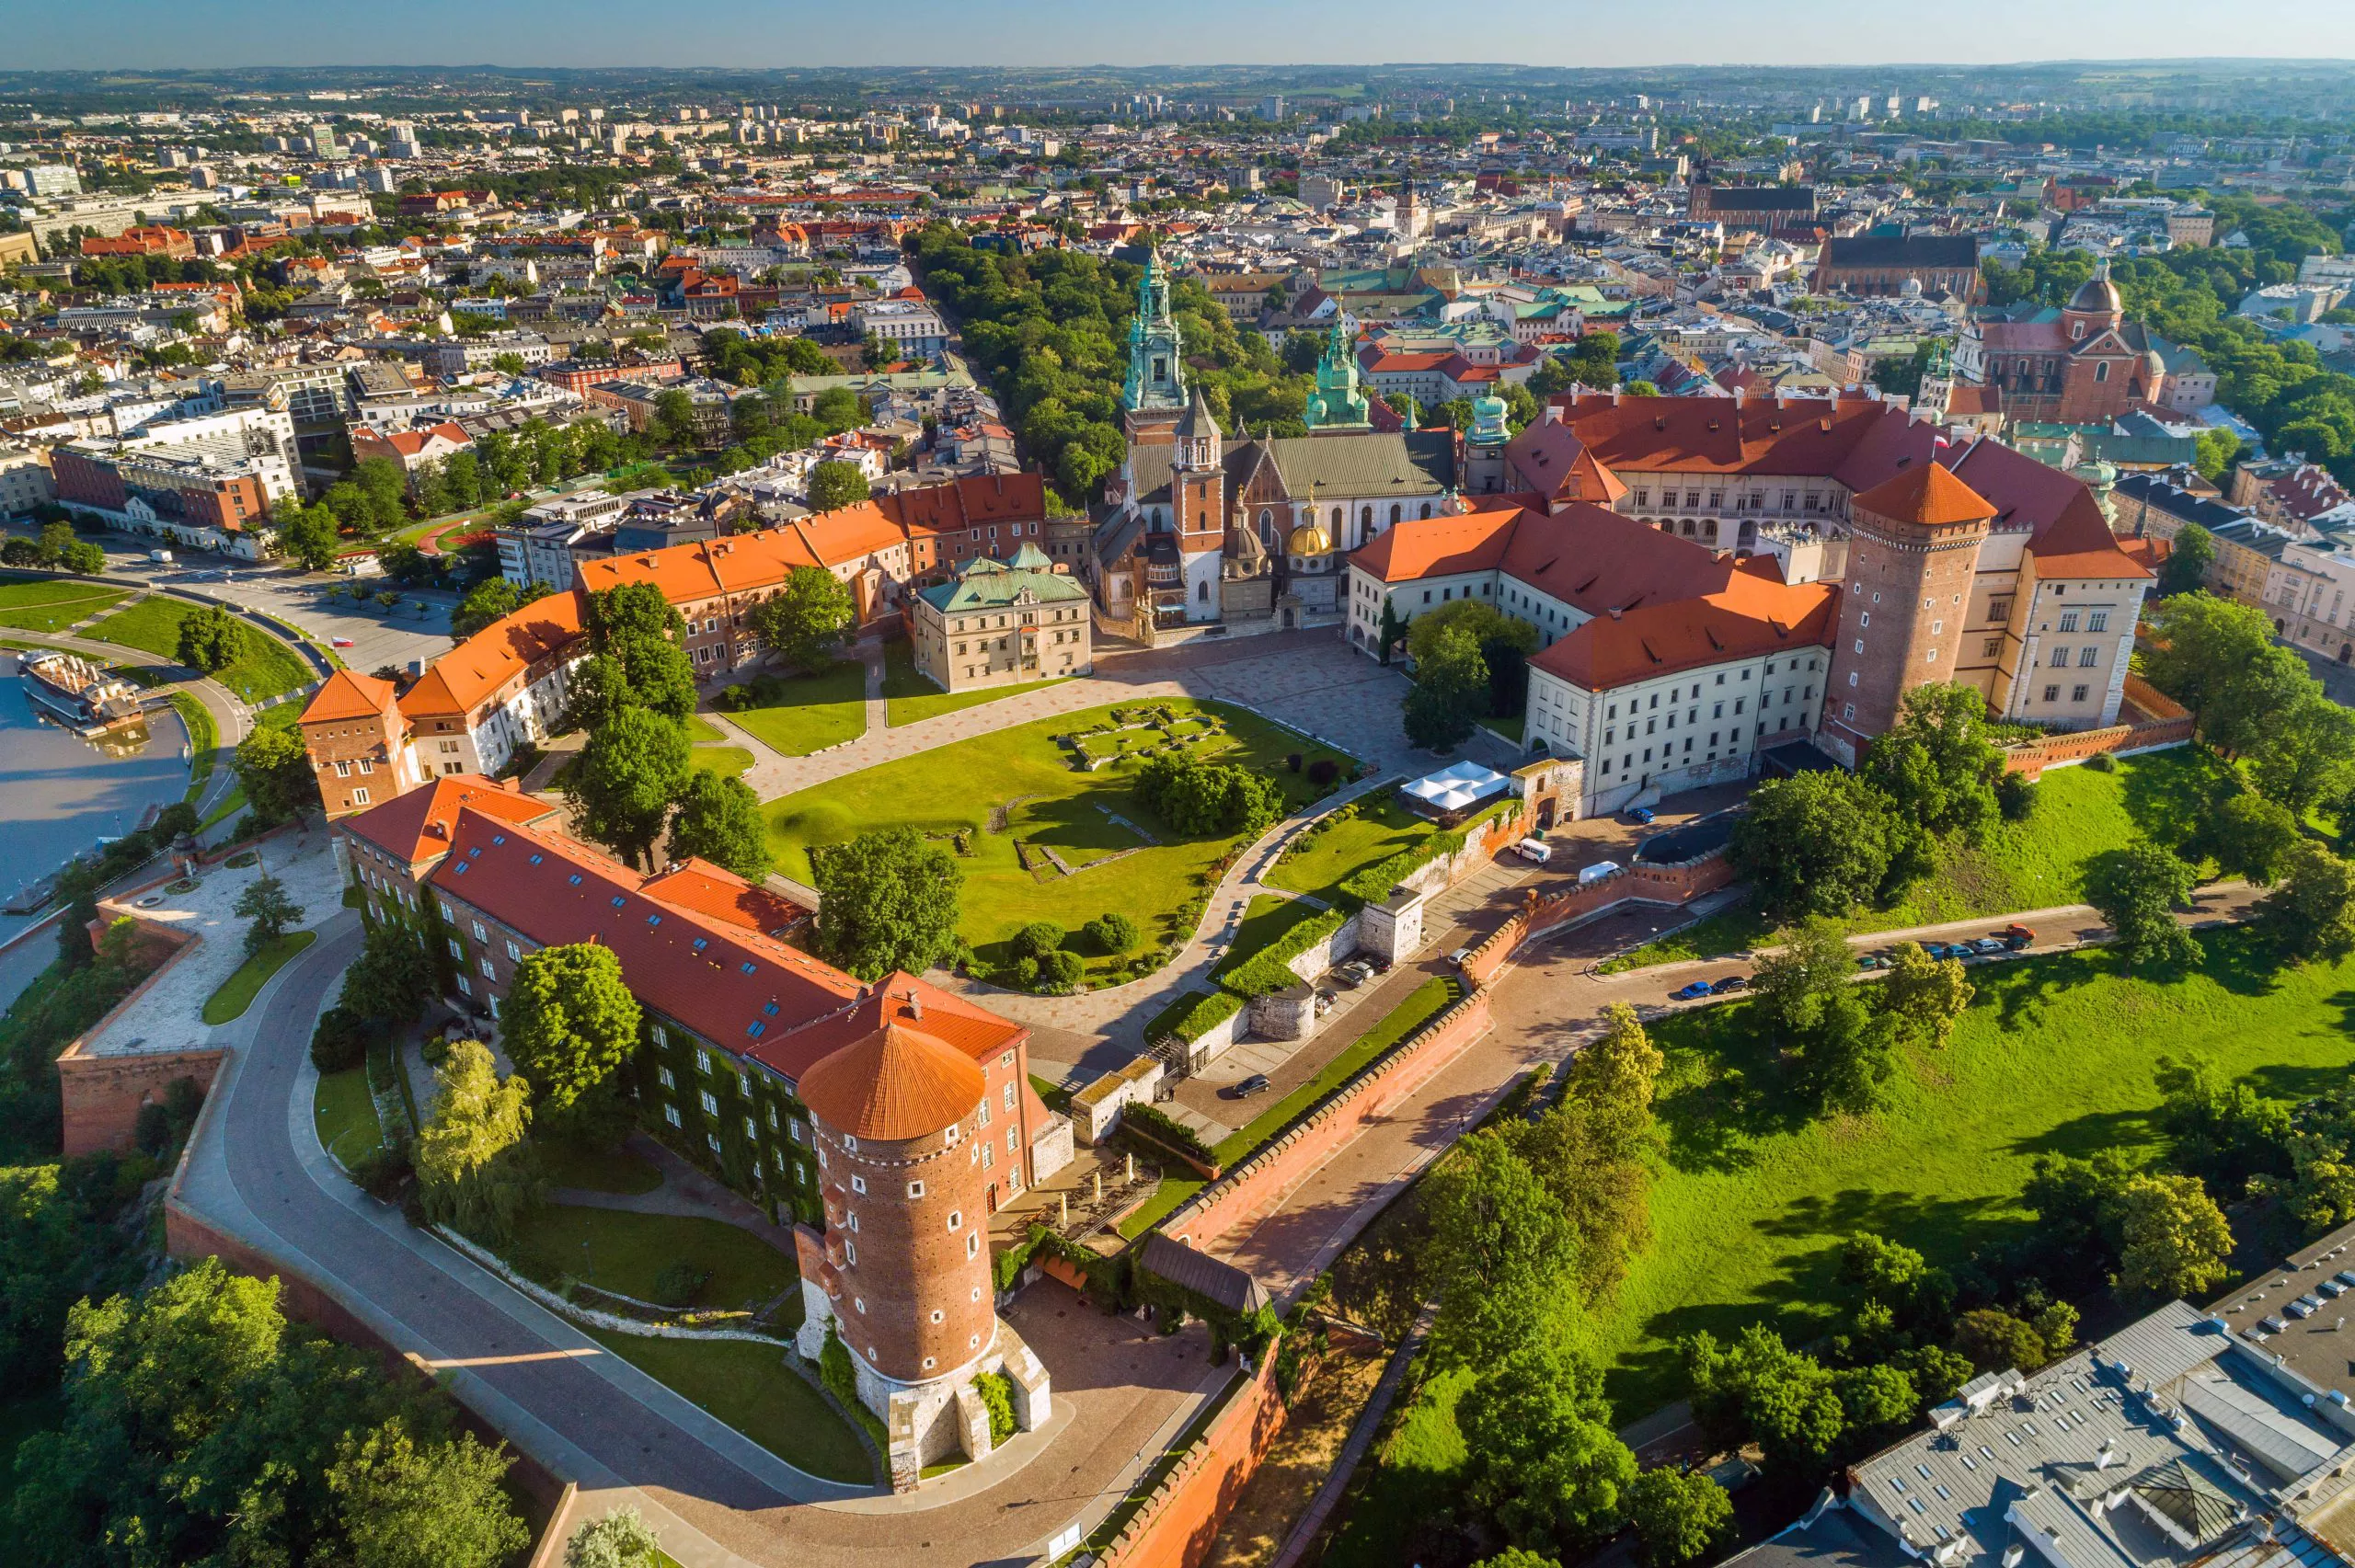 The whole of brightly sunlit Wawel Hill seen from a drone. A wavy line of buildings and walls roofed with brick-red tiles are standing among the greenery, to reach the Cathedral with its green-spired towers in the centre, just left from the imposing body of the Castle. The city centre with its numerous churches makes up the background.